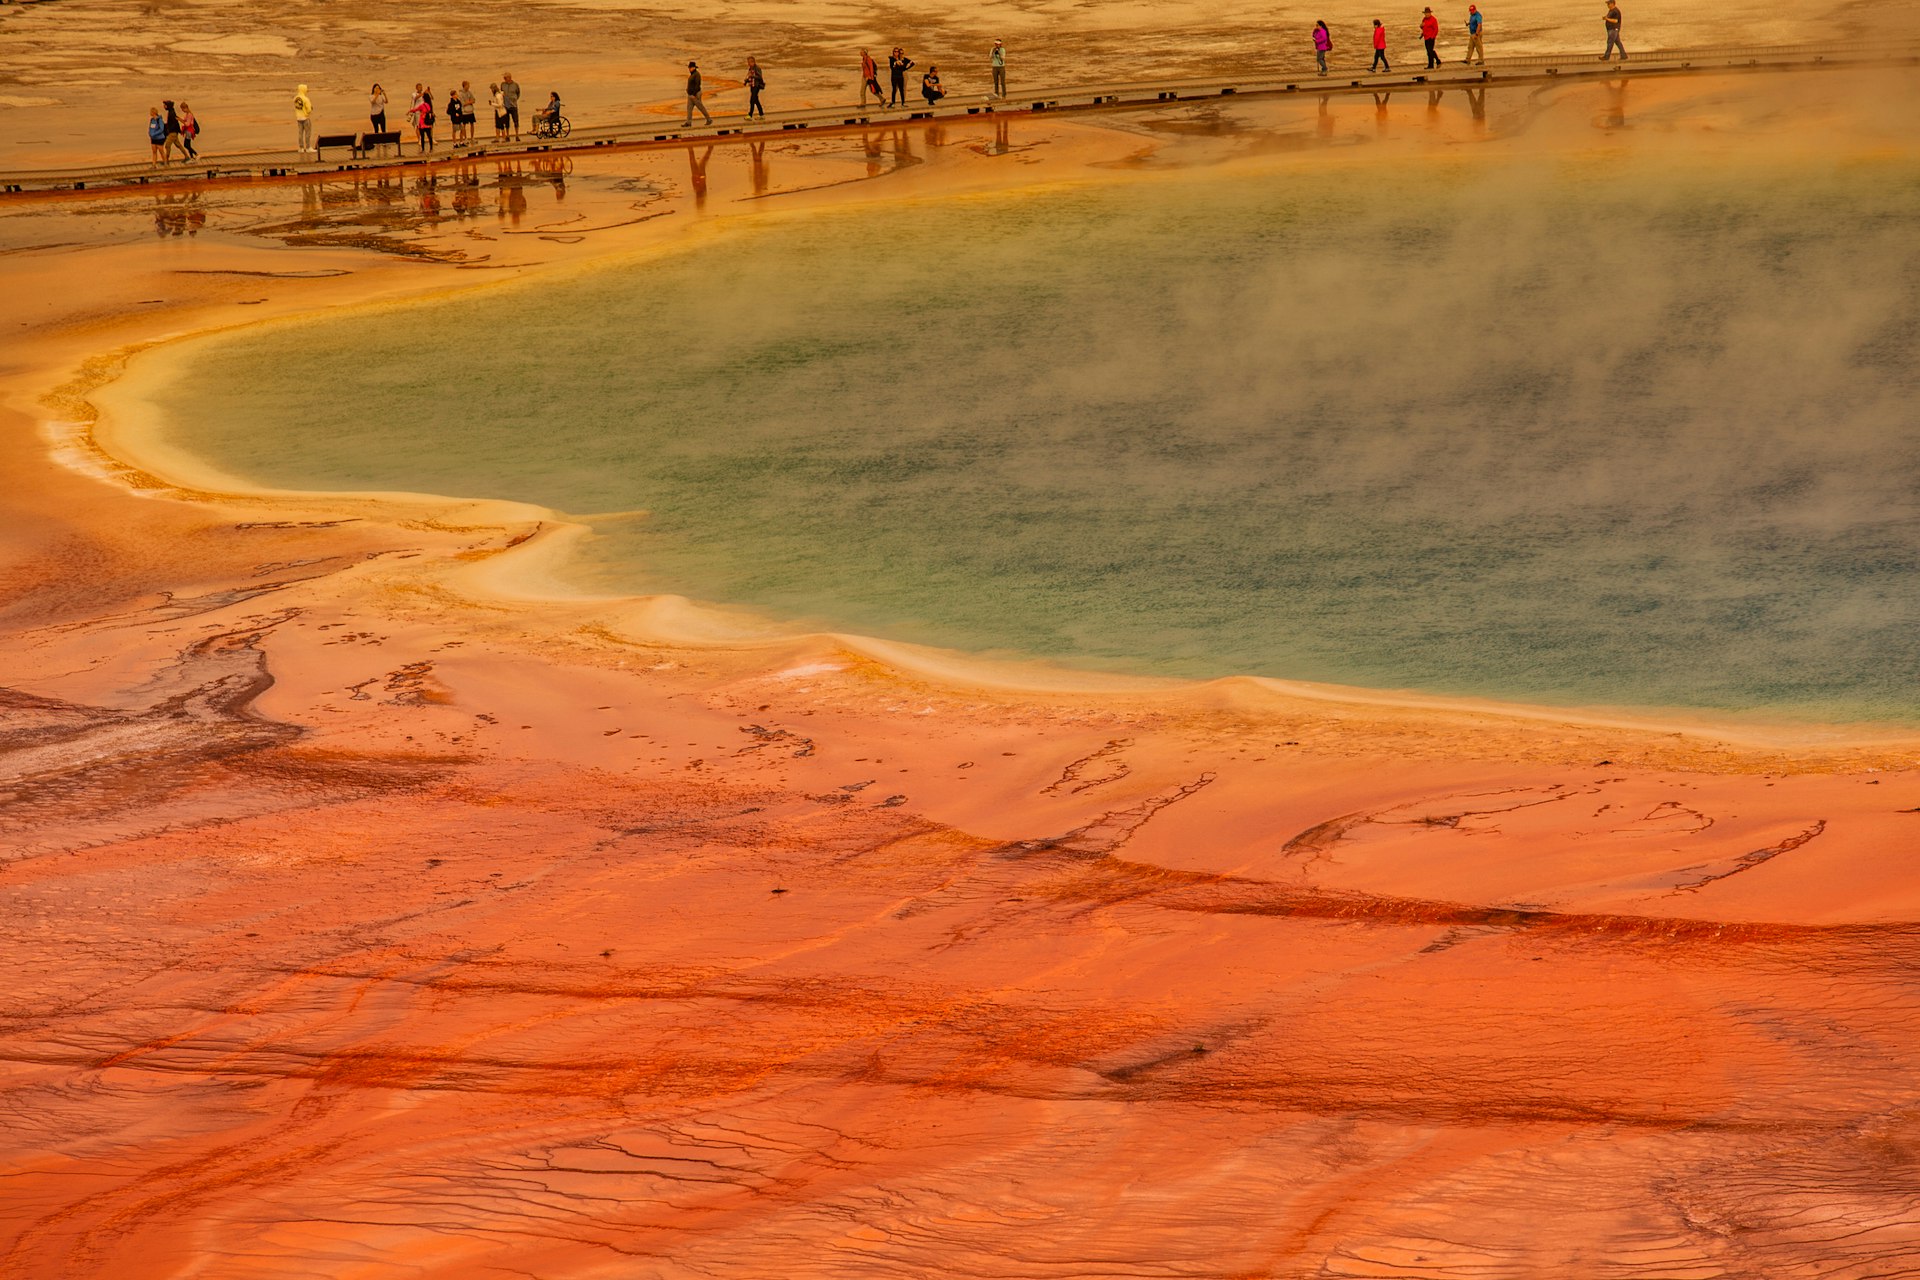 Visitors of the Grand Prismatic Spring walking on the pathway above the hot volcano landscape in Yellowstone National Park, WYO, USA.